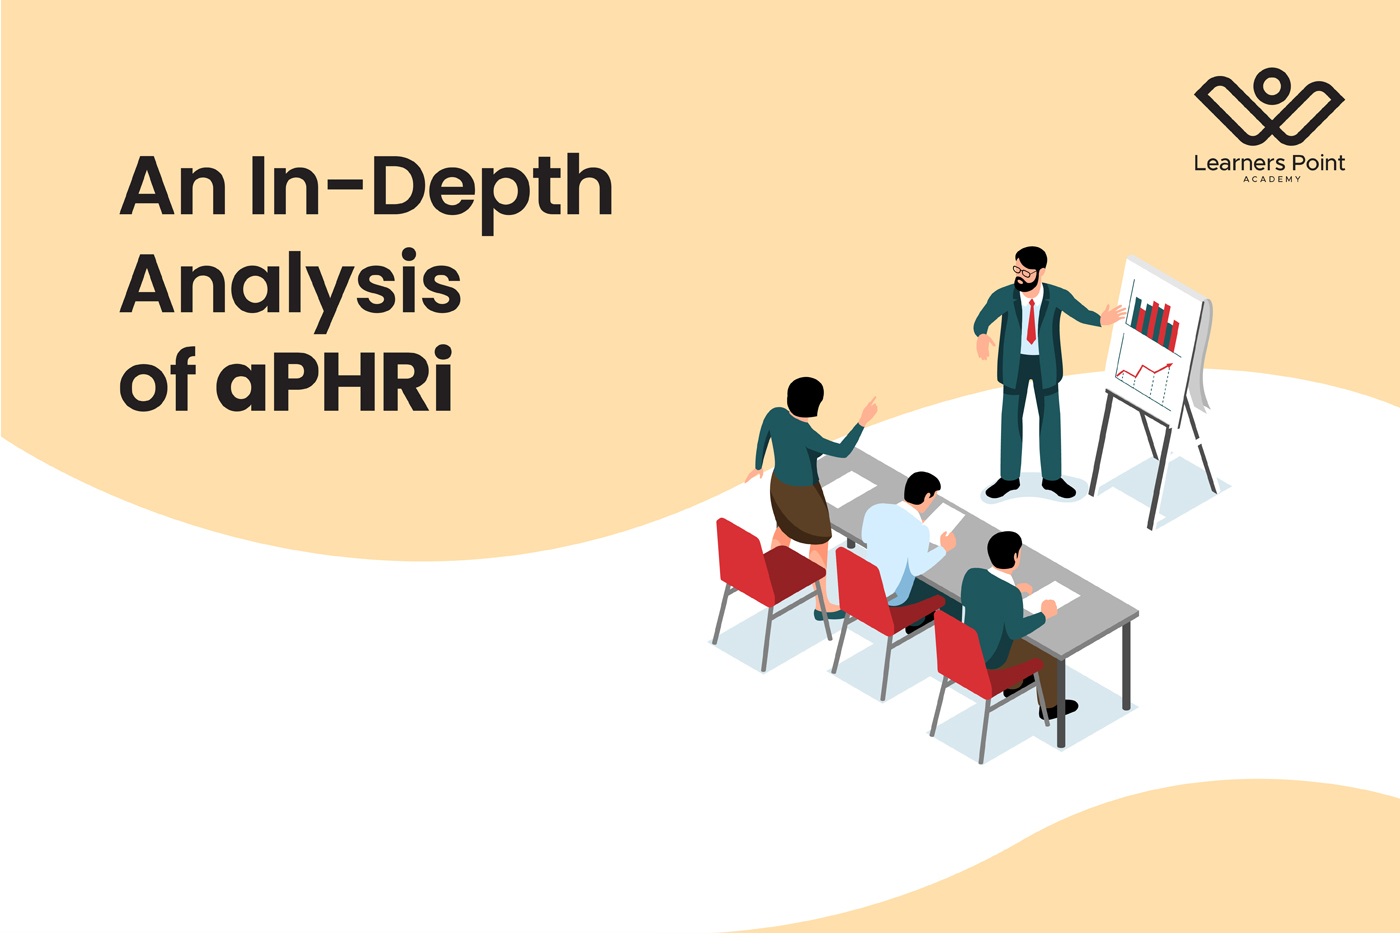 An In-Depth Analysis of aPHRi